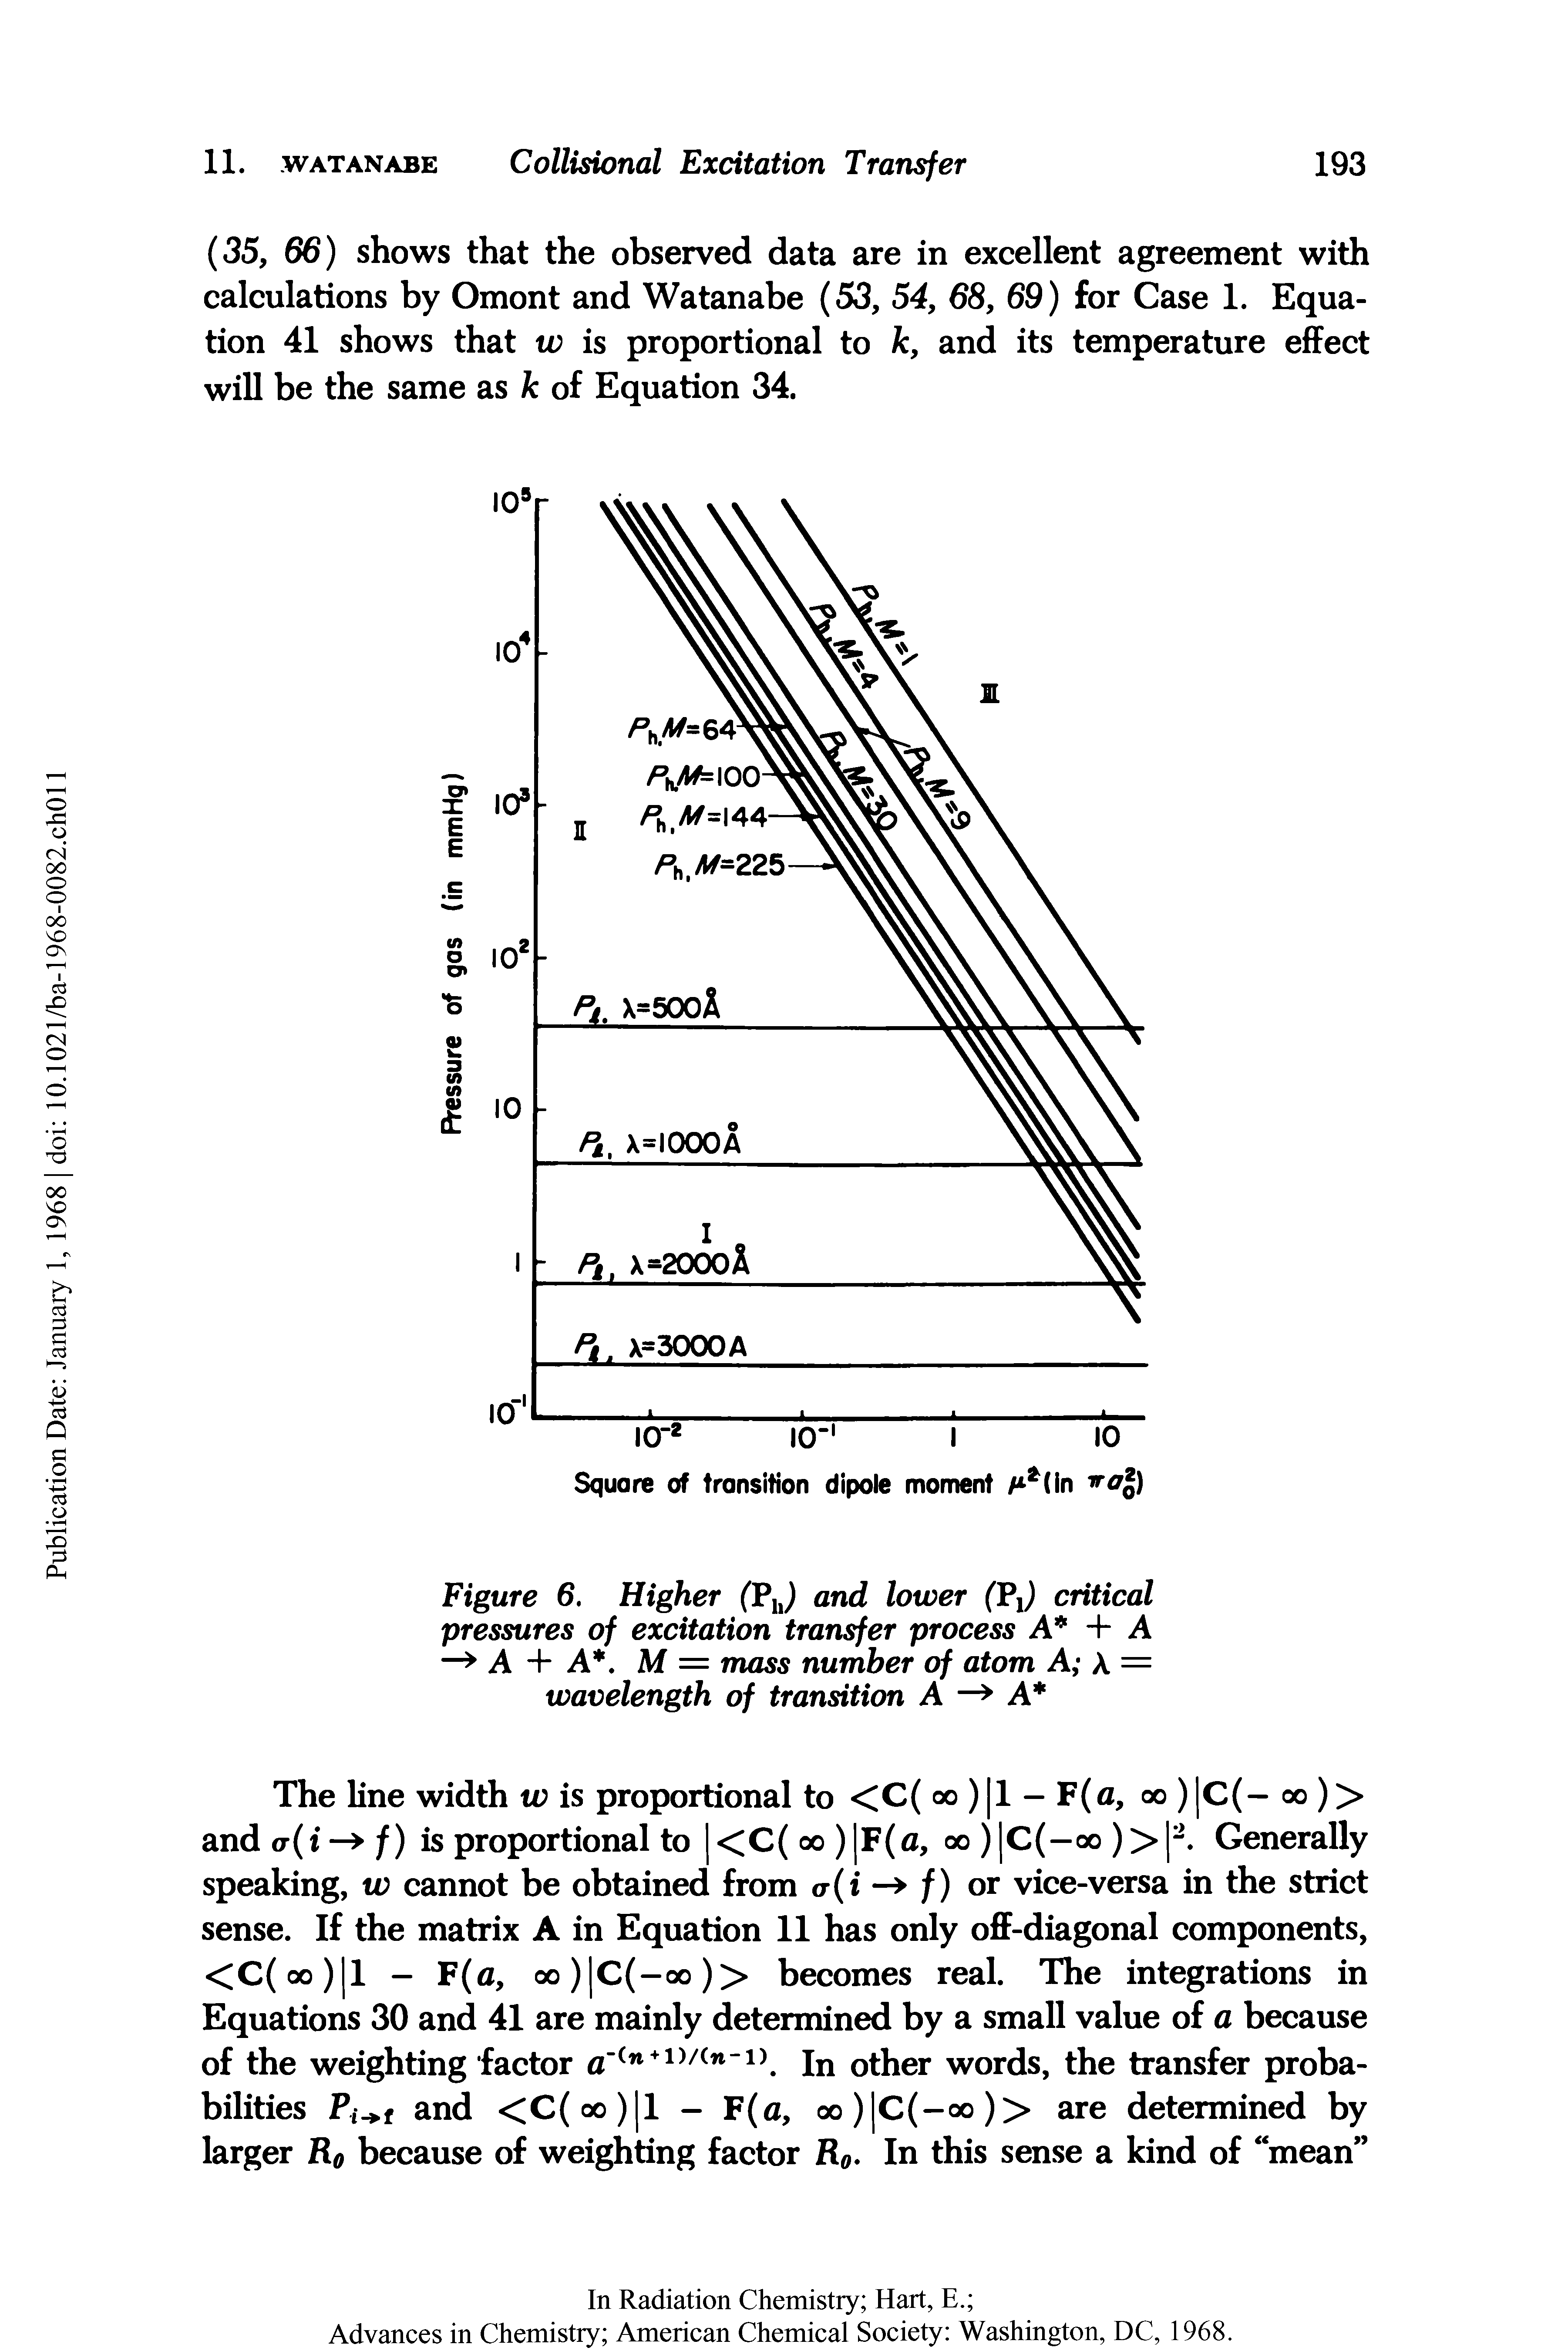 Figure 6. Higher (PJ and lower (PJ critical pressures of excitation transfer process A + A —> A + A. M = mass number of atom A A = wavelength of transition A —> A ...